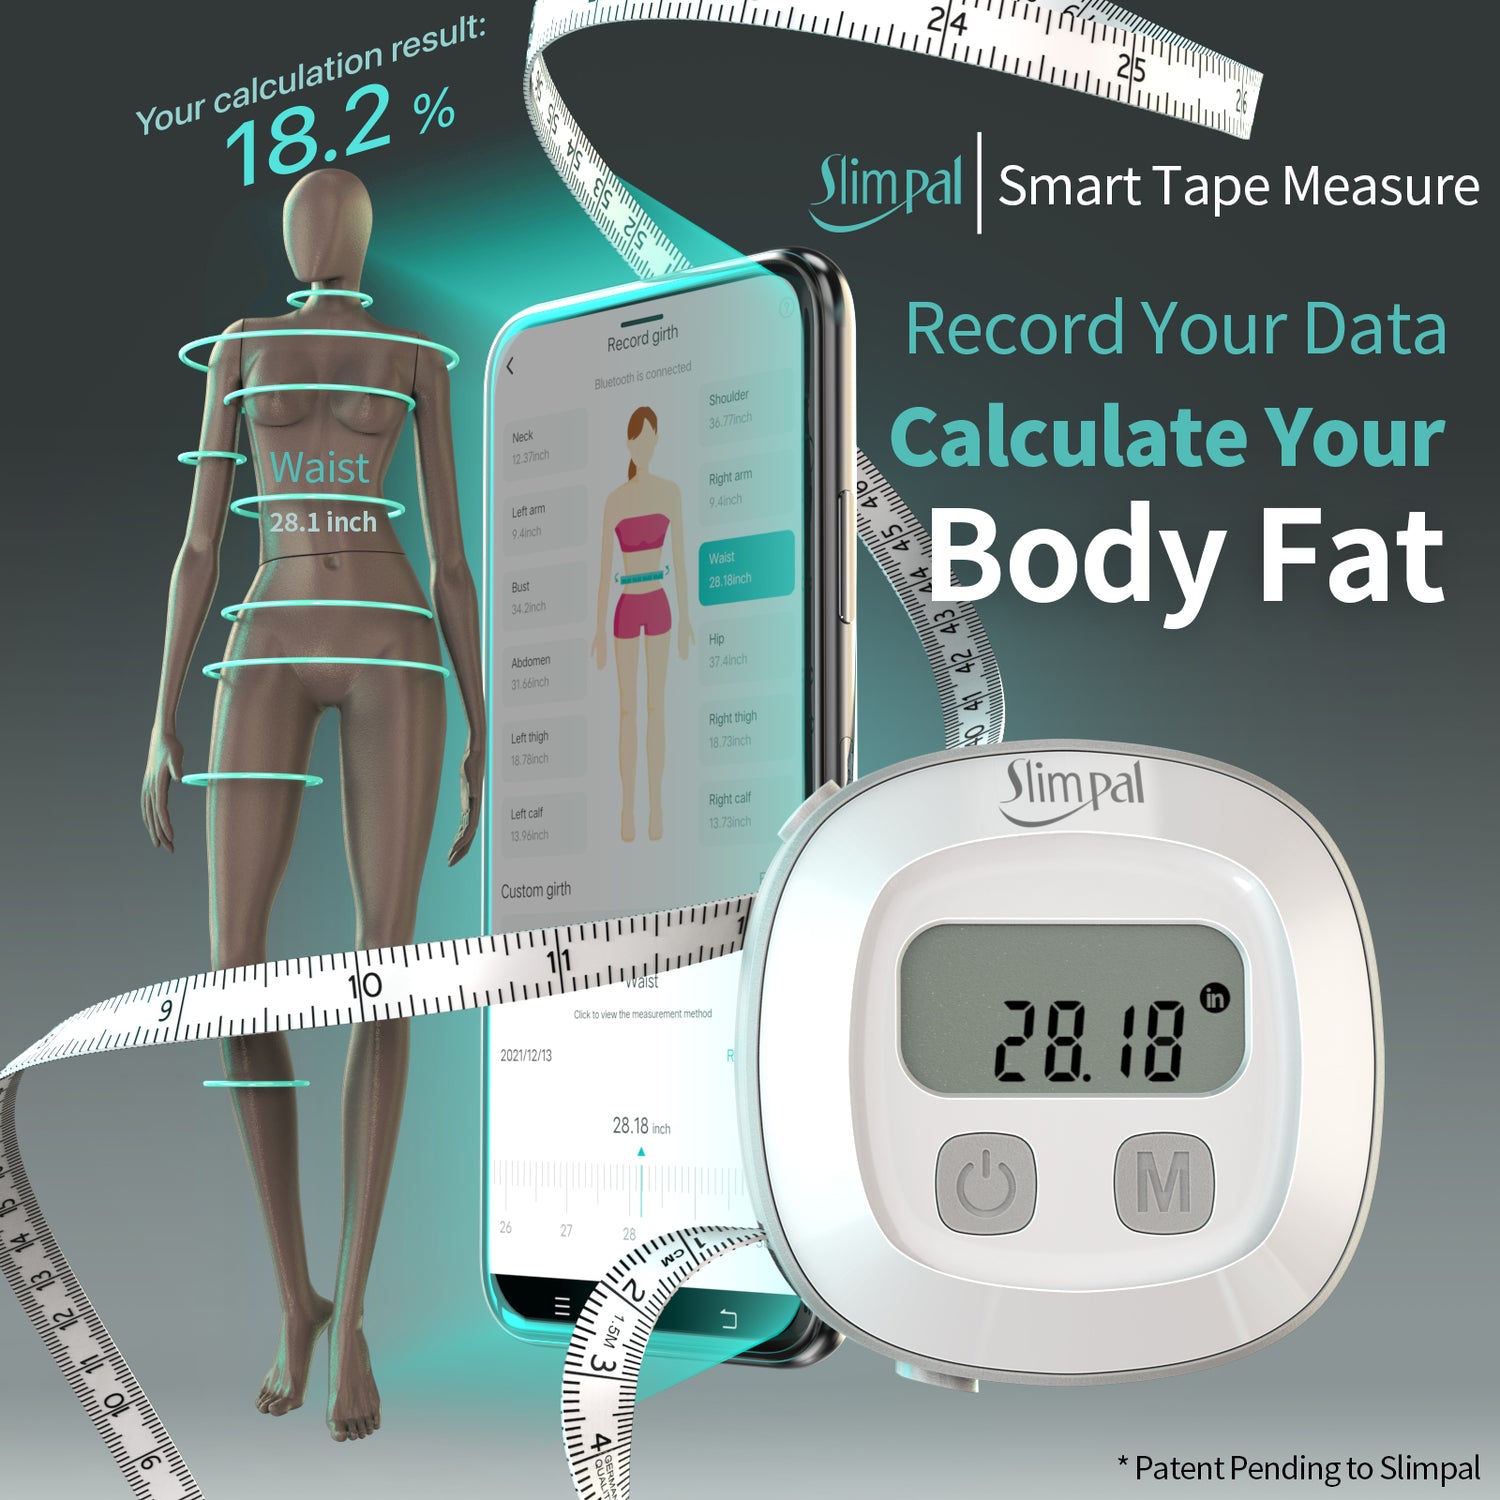 Body Measuring Tape. Stay Healthy. Measure Tape - Measuring Tools